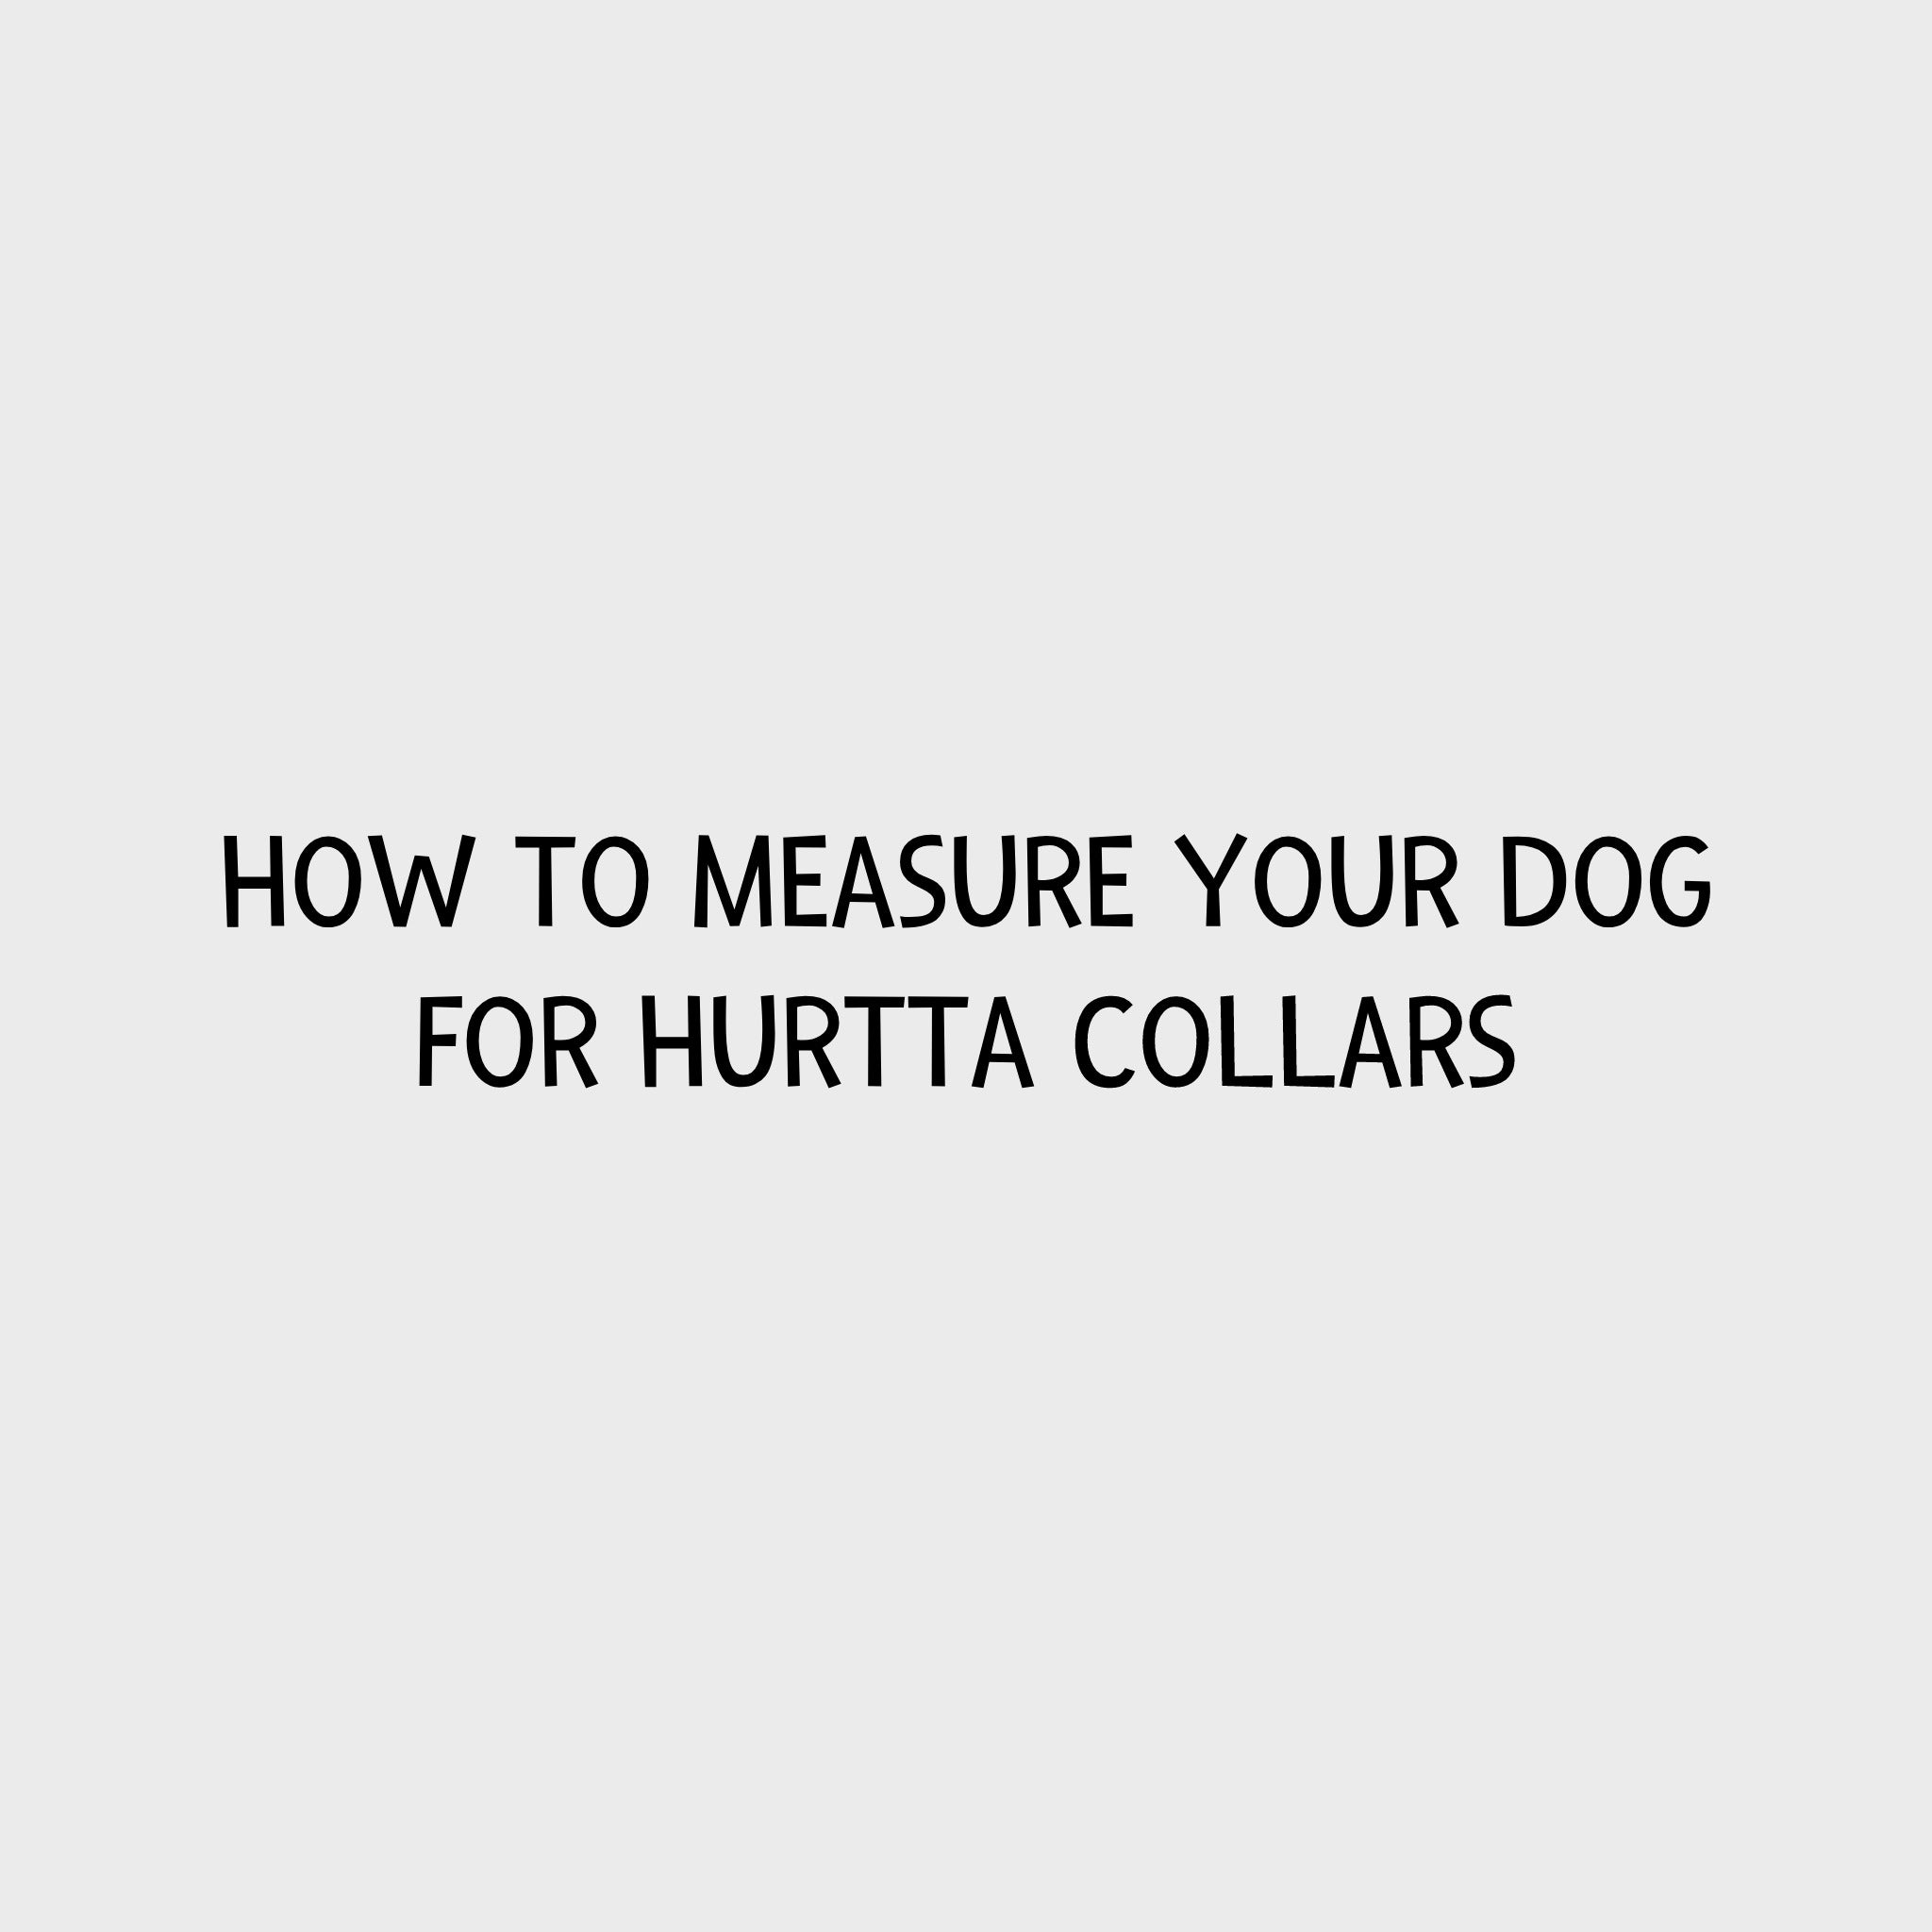 Video - How to measure your dog for Hurtta collars